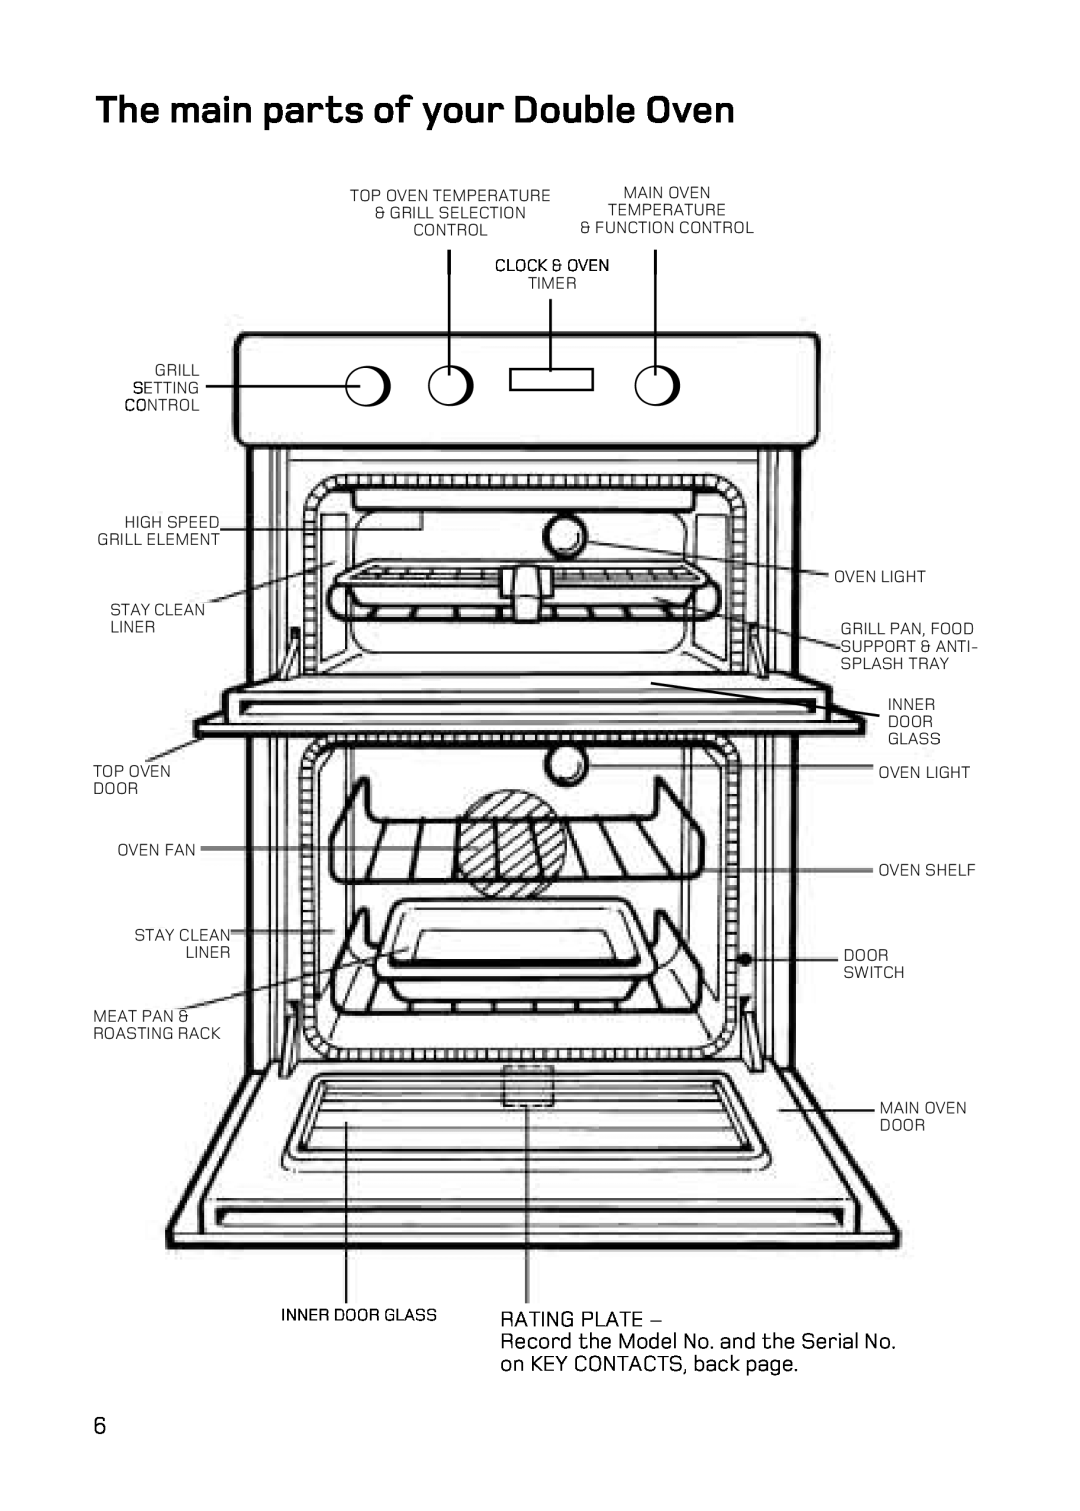 Hotpoint UQ47, UE47 manual The main parts of your Double Oven, Rating Plate 